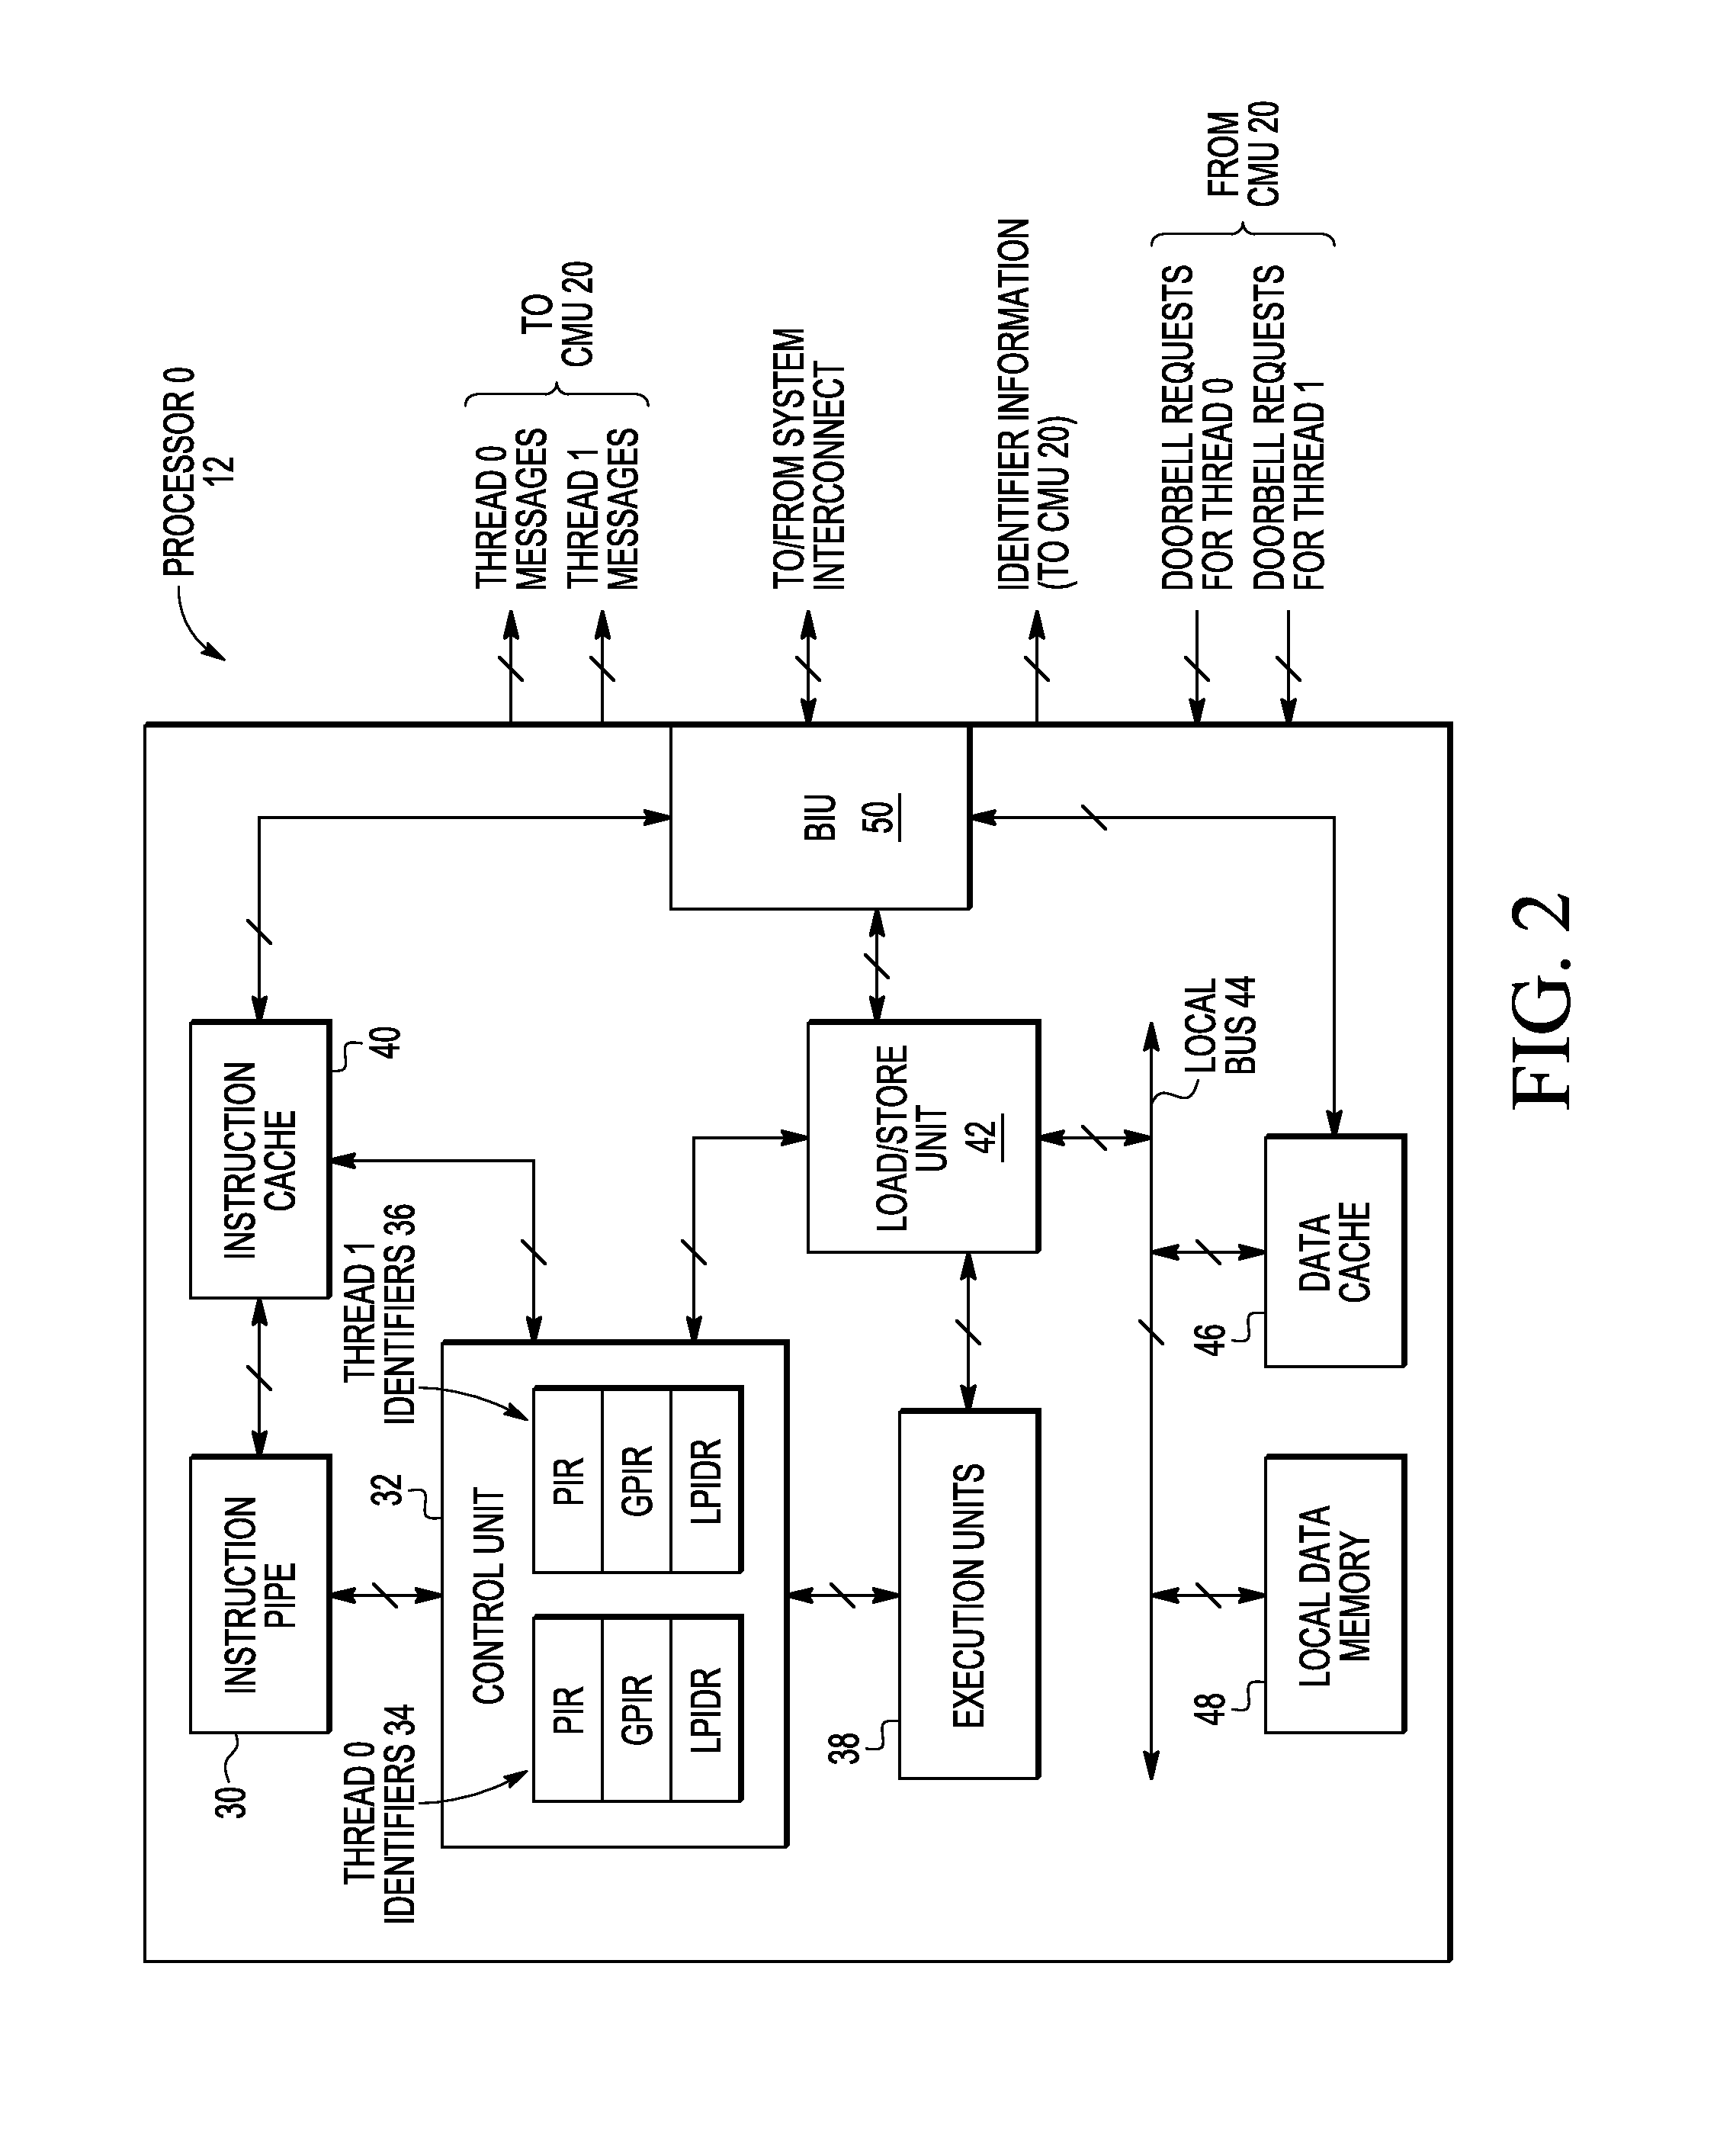 Message filtering in a data processing system